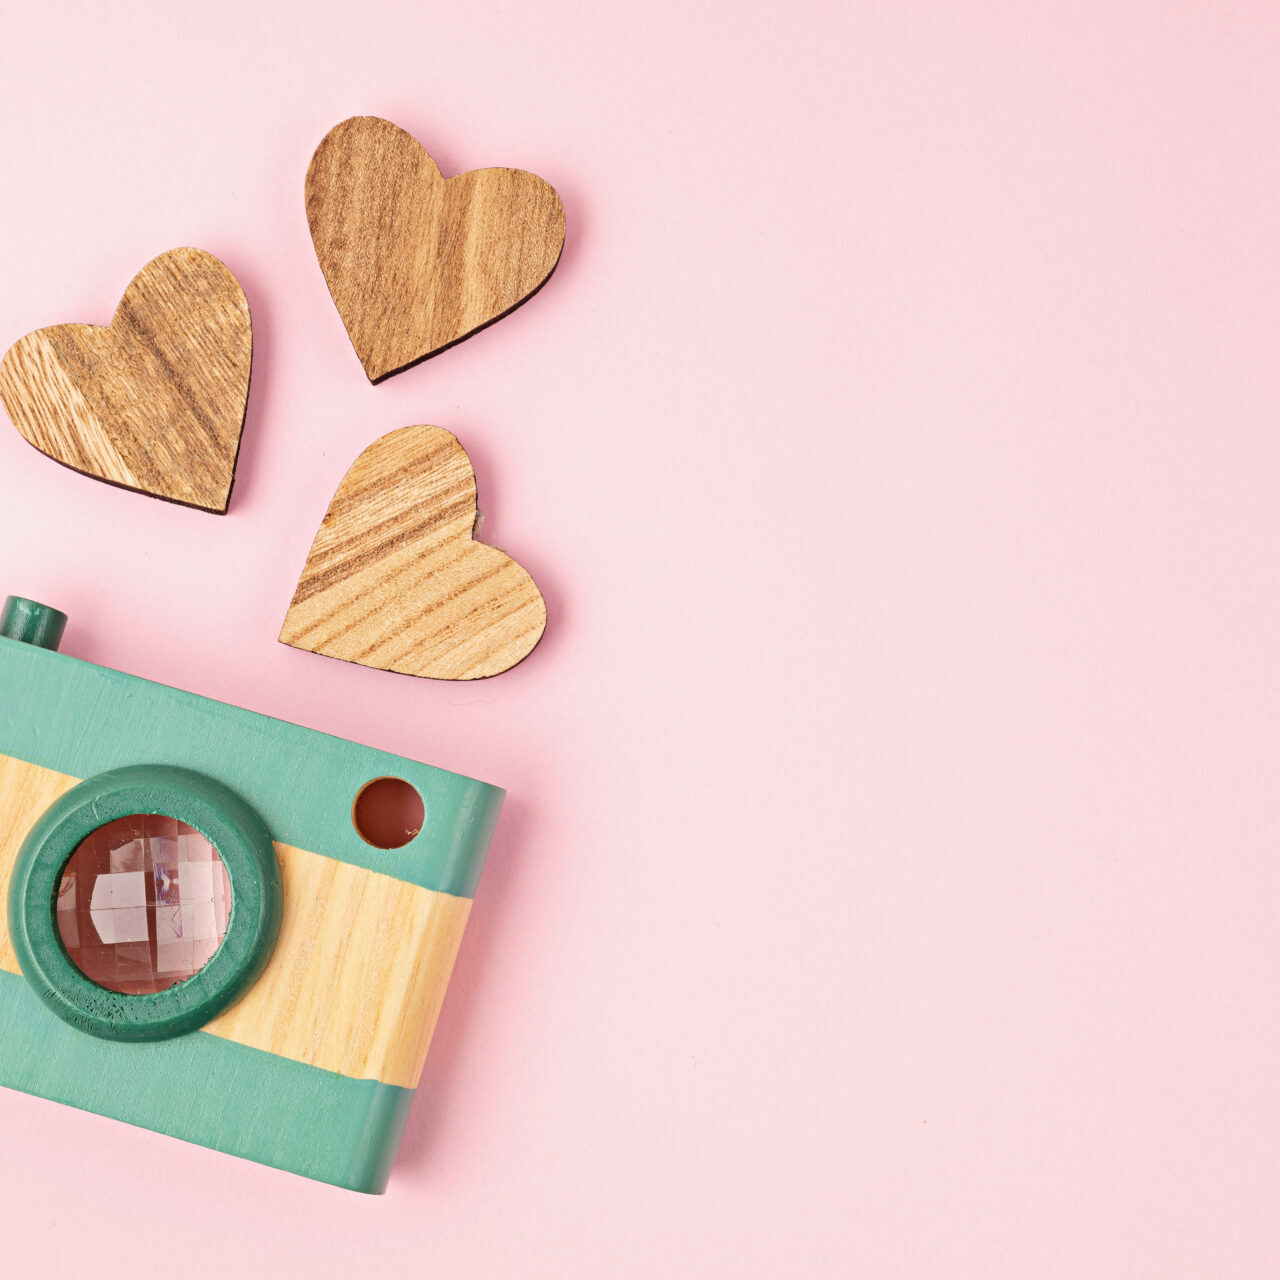 Flat lay with toy wooden camera and hearts over pink background. Social media, posts, likes, followers, online photography classes concept. Top view, copy space.